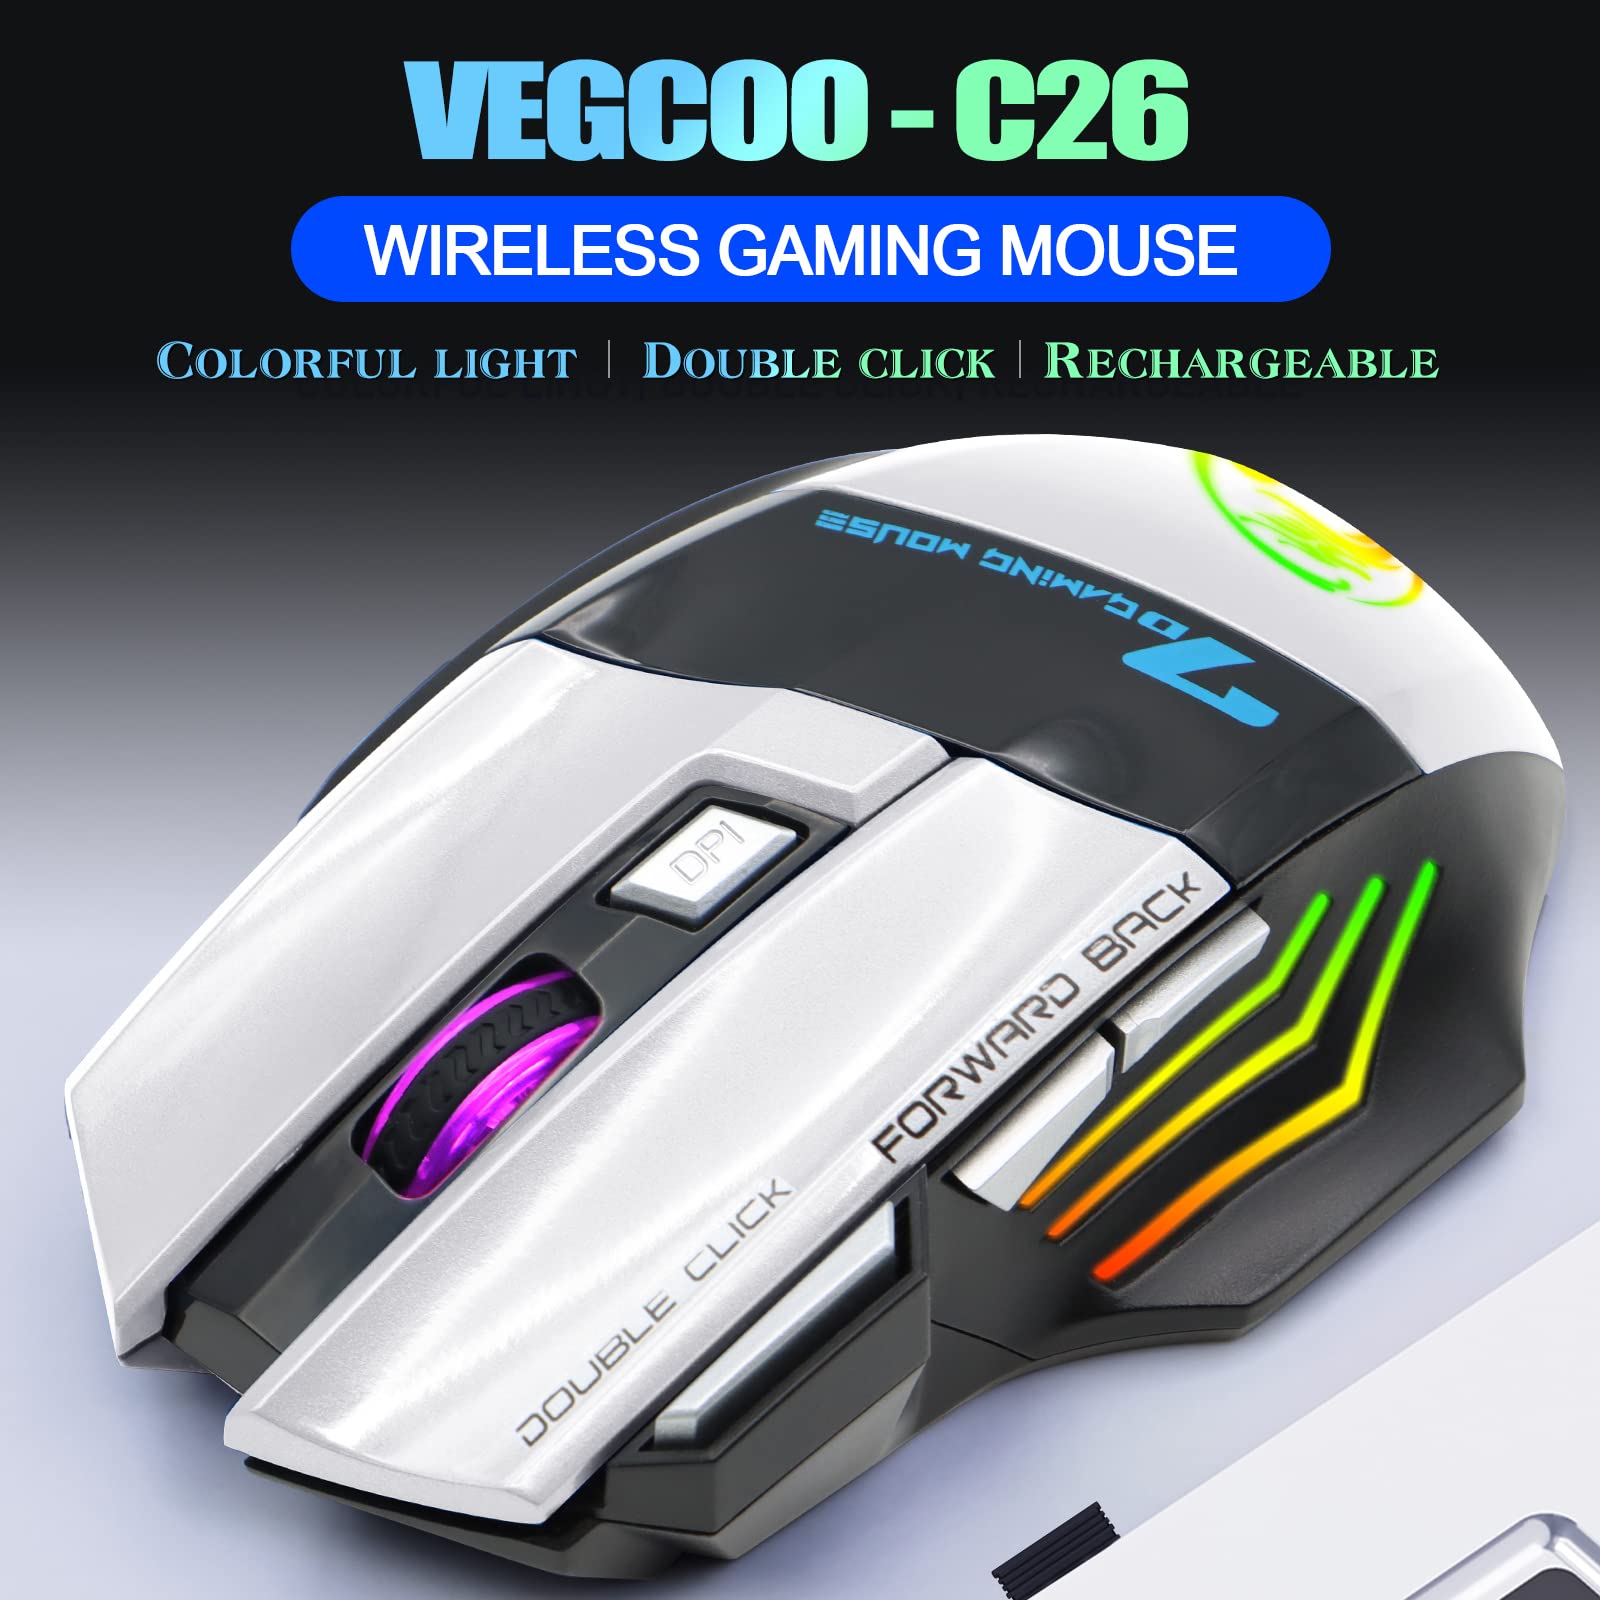 VEGCOO Wireless Gaming Mouse, Rechargeable Silent Wireless Mouse with 4800 DPI Adjustable,Double Click Key, Colorful RGB Lights, Computer Mice with Thumb Rest for PC/Mac Gamer (C26 White)